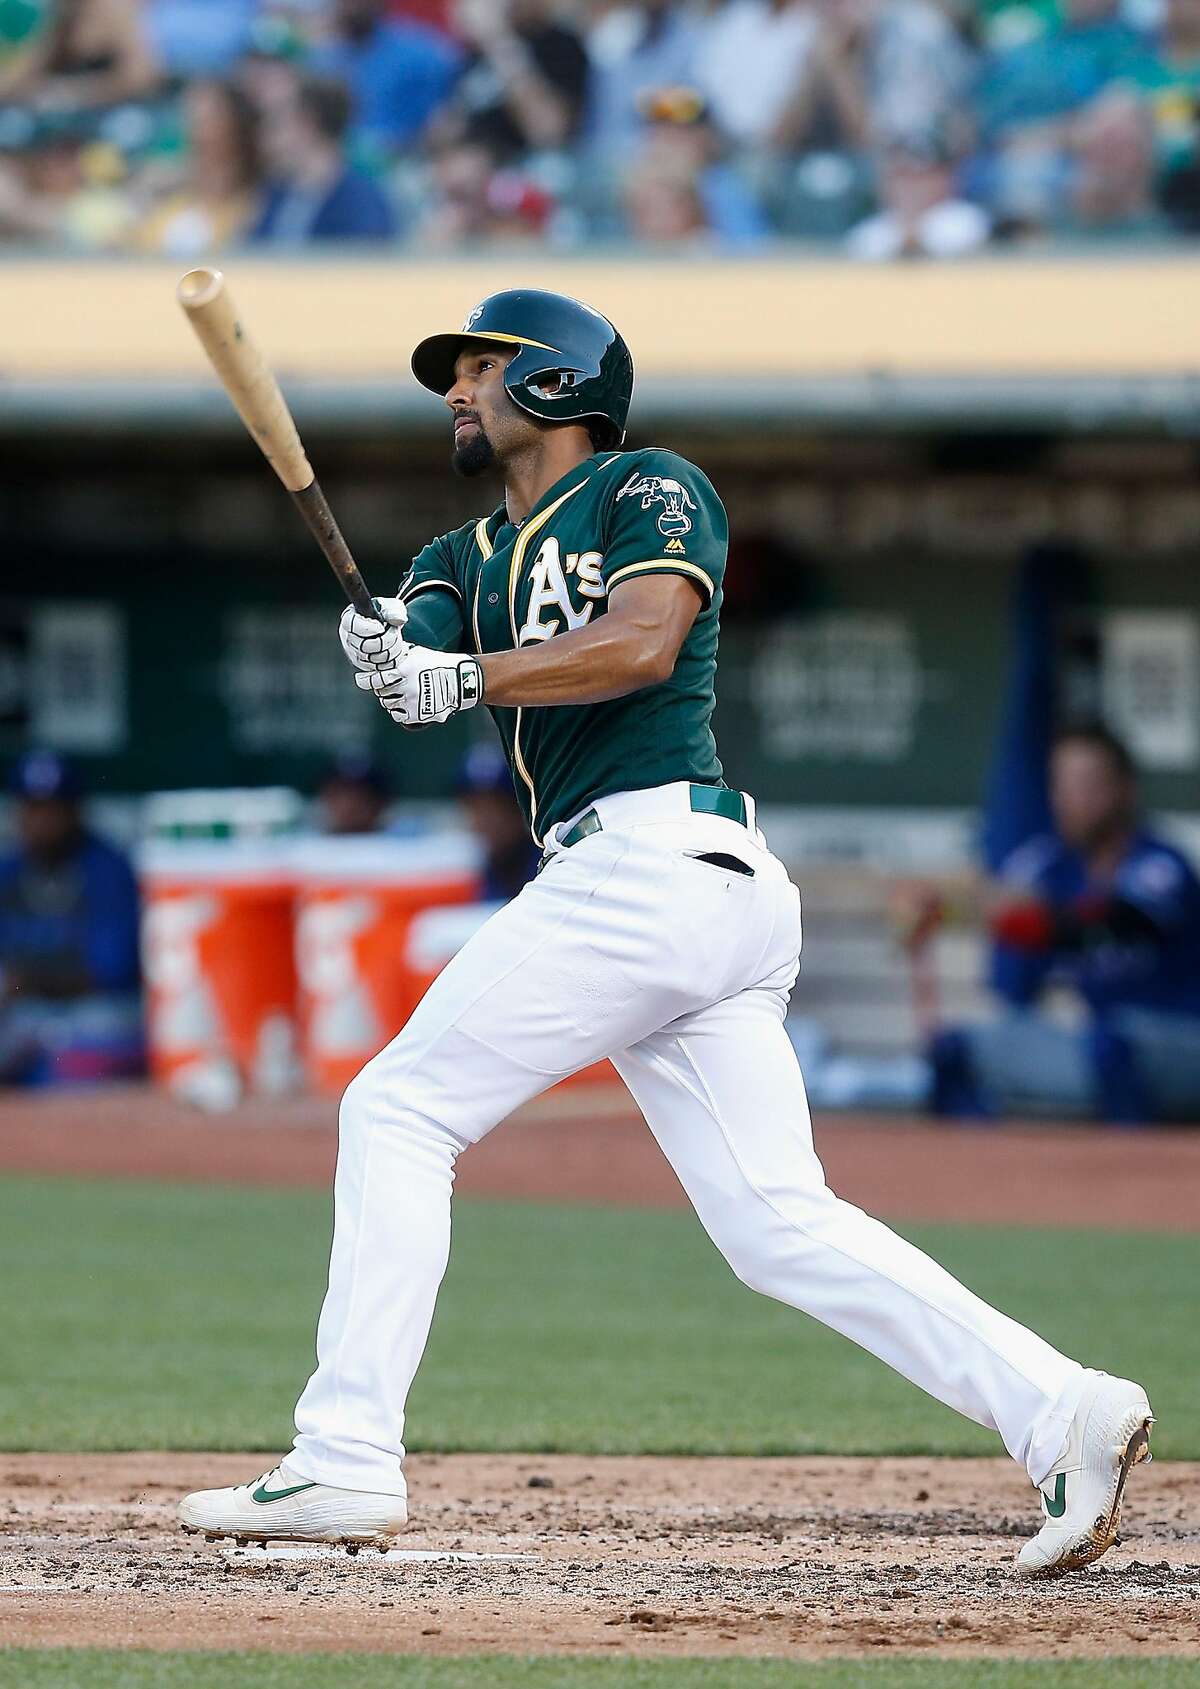 OAKLAND, CALIFORNIA - JULY 27: Marcus Semien #10 of the Oakland Athletics hits a solo home run in the bottom of the third inning against the Texas Rangers at Ring Central Coliseum on July 27, 2019 in Oakland, California. (Photo by Lachlan Cunningham/Getty Images)